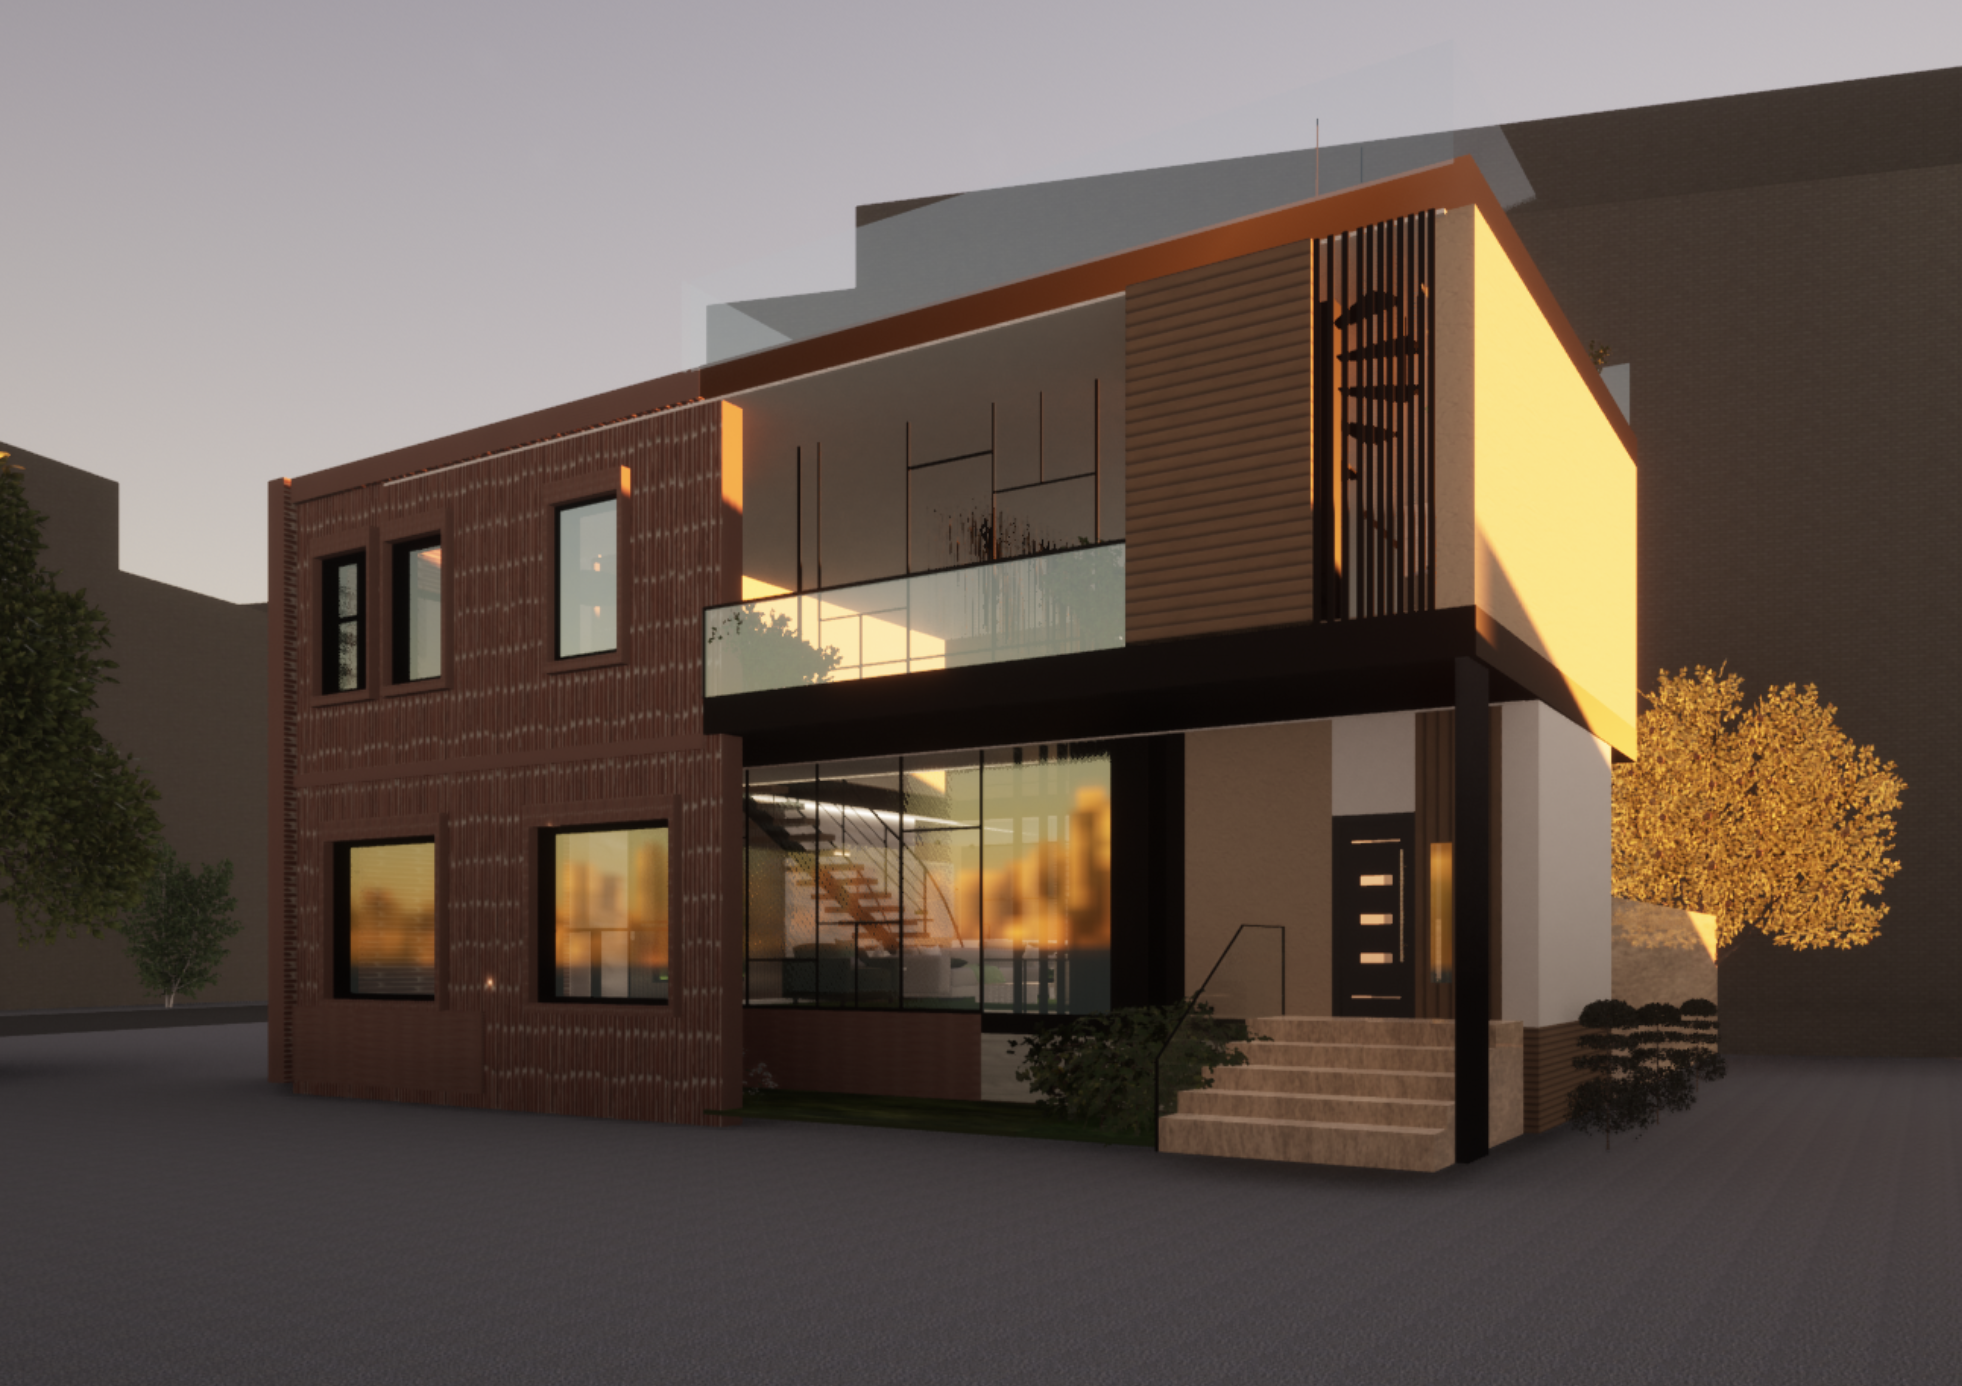 Bulwer St. Residence Exterior Perspective